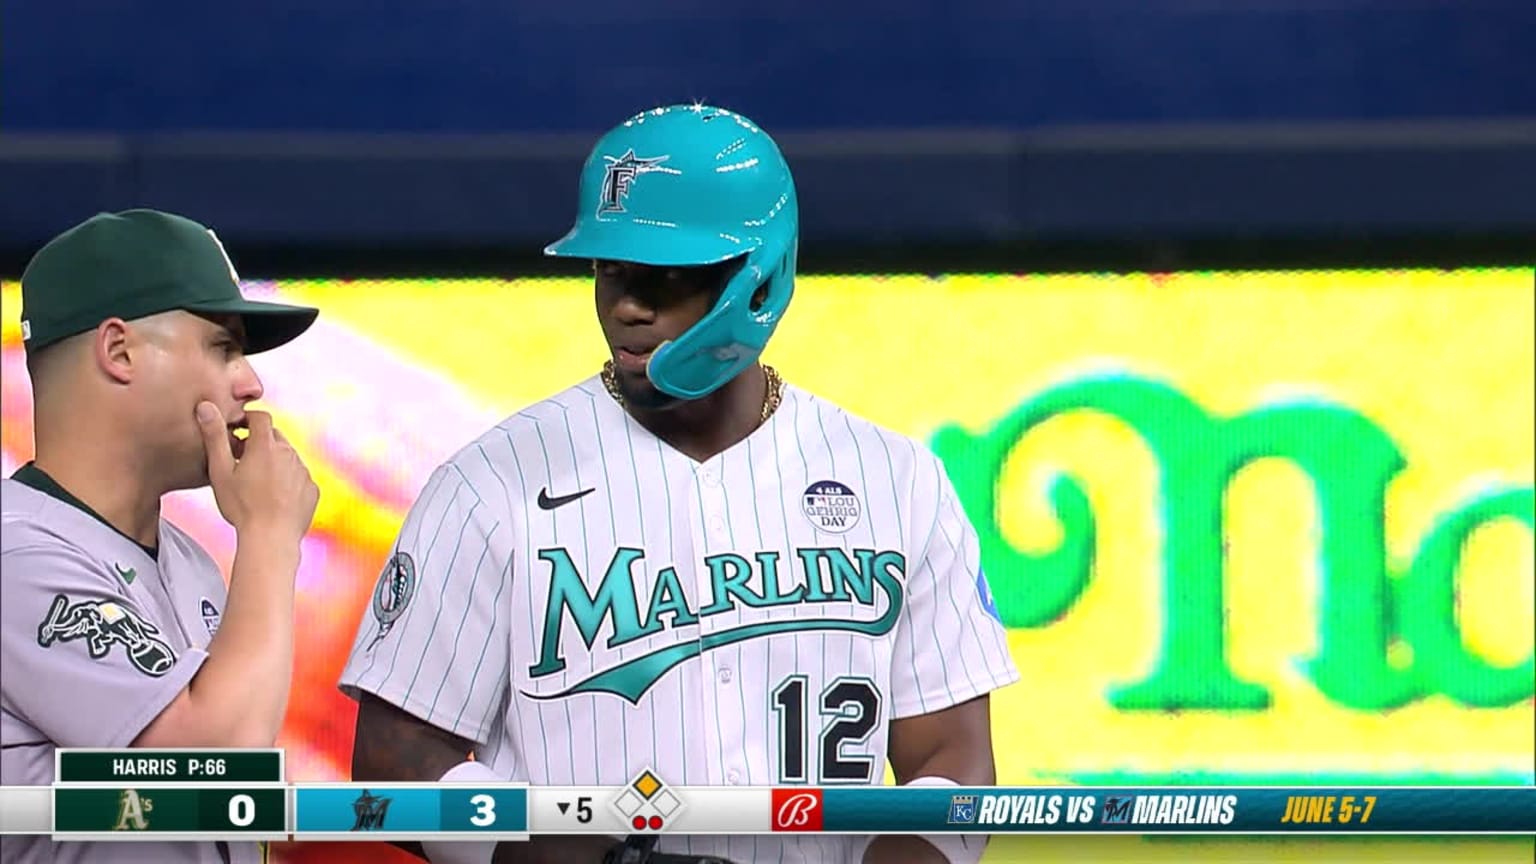 Baseballer - The Miami Marlins throwback uniforms are absolutely